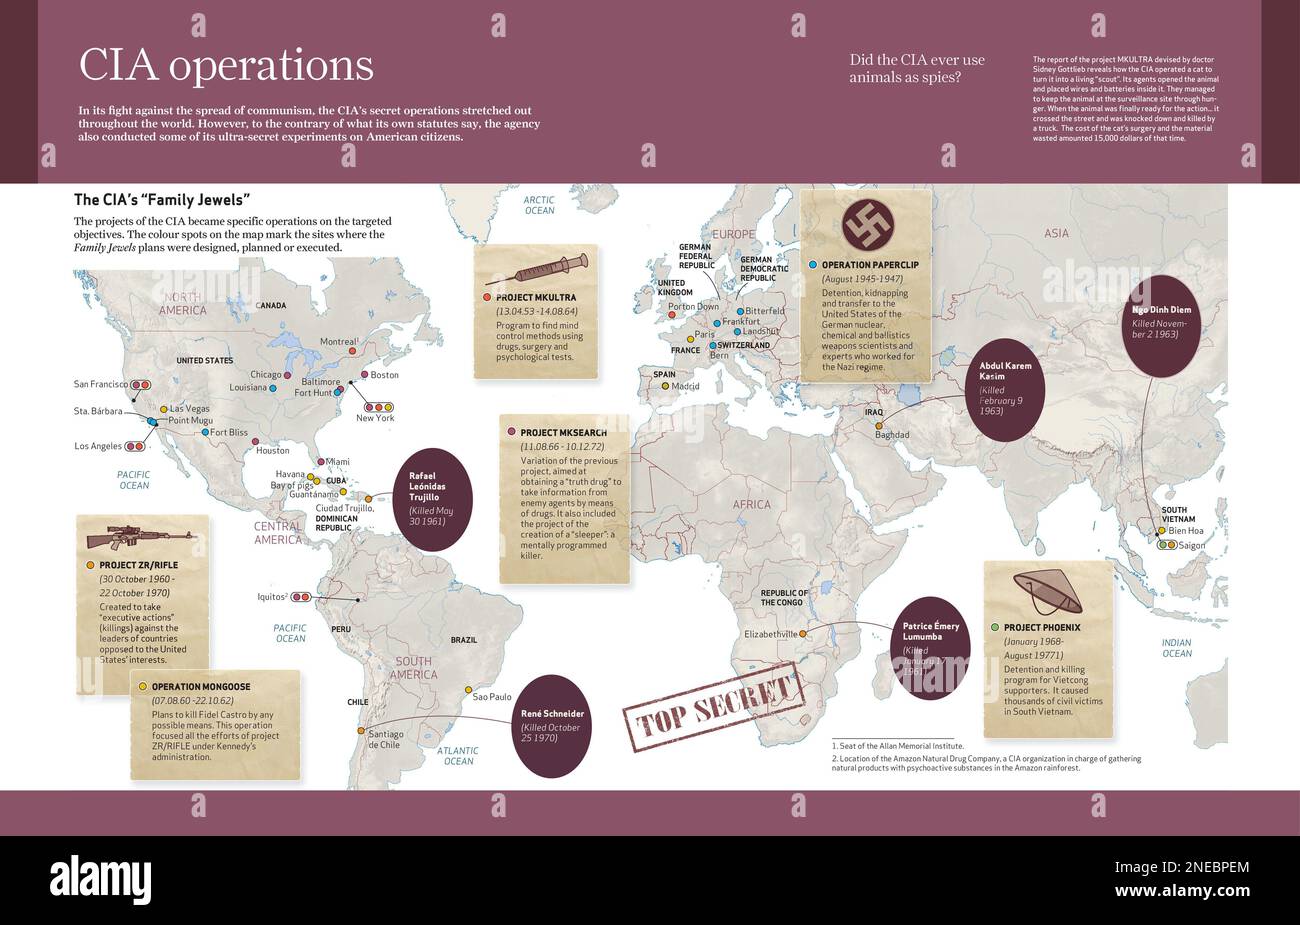 Computer graphics about the secret operations the CIA performed around the world from the 40's to the 70's to face communism. [Adobe InDesign (.indd); 4960x3188]. Stock Photo